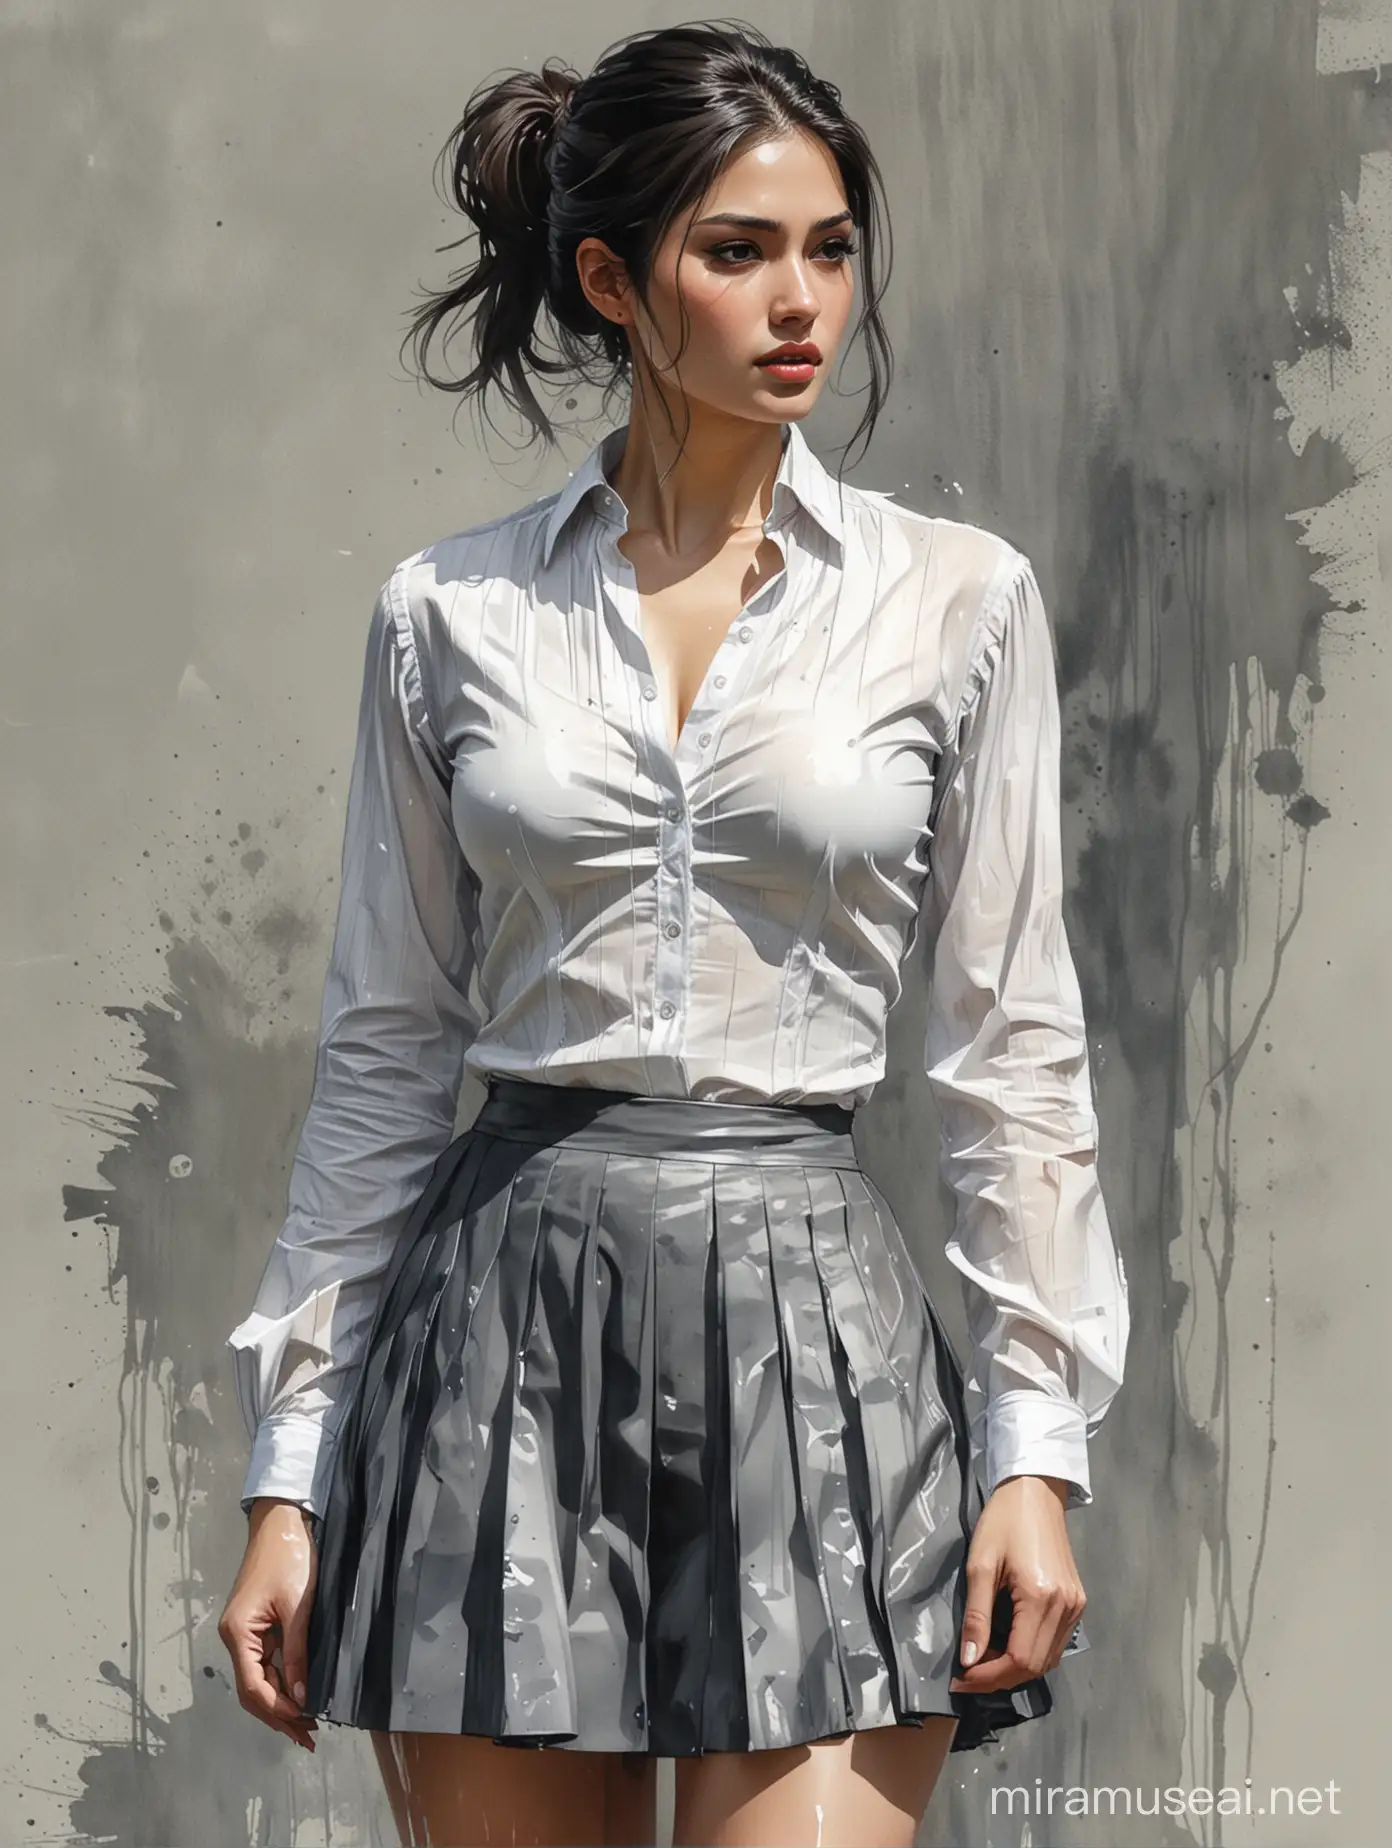 Alex Maleev illustration depicting Jane de Leon wearing blouse and pleated skirt, wet cleavage, ponytail hair, muscular build, No makeup, very delicate and thin lines, messy watercolor, no distortion, gray palette, insanely high detail, very high quality, extreme low angle view, seen from below